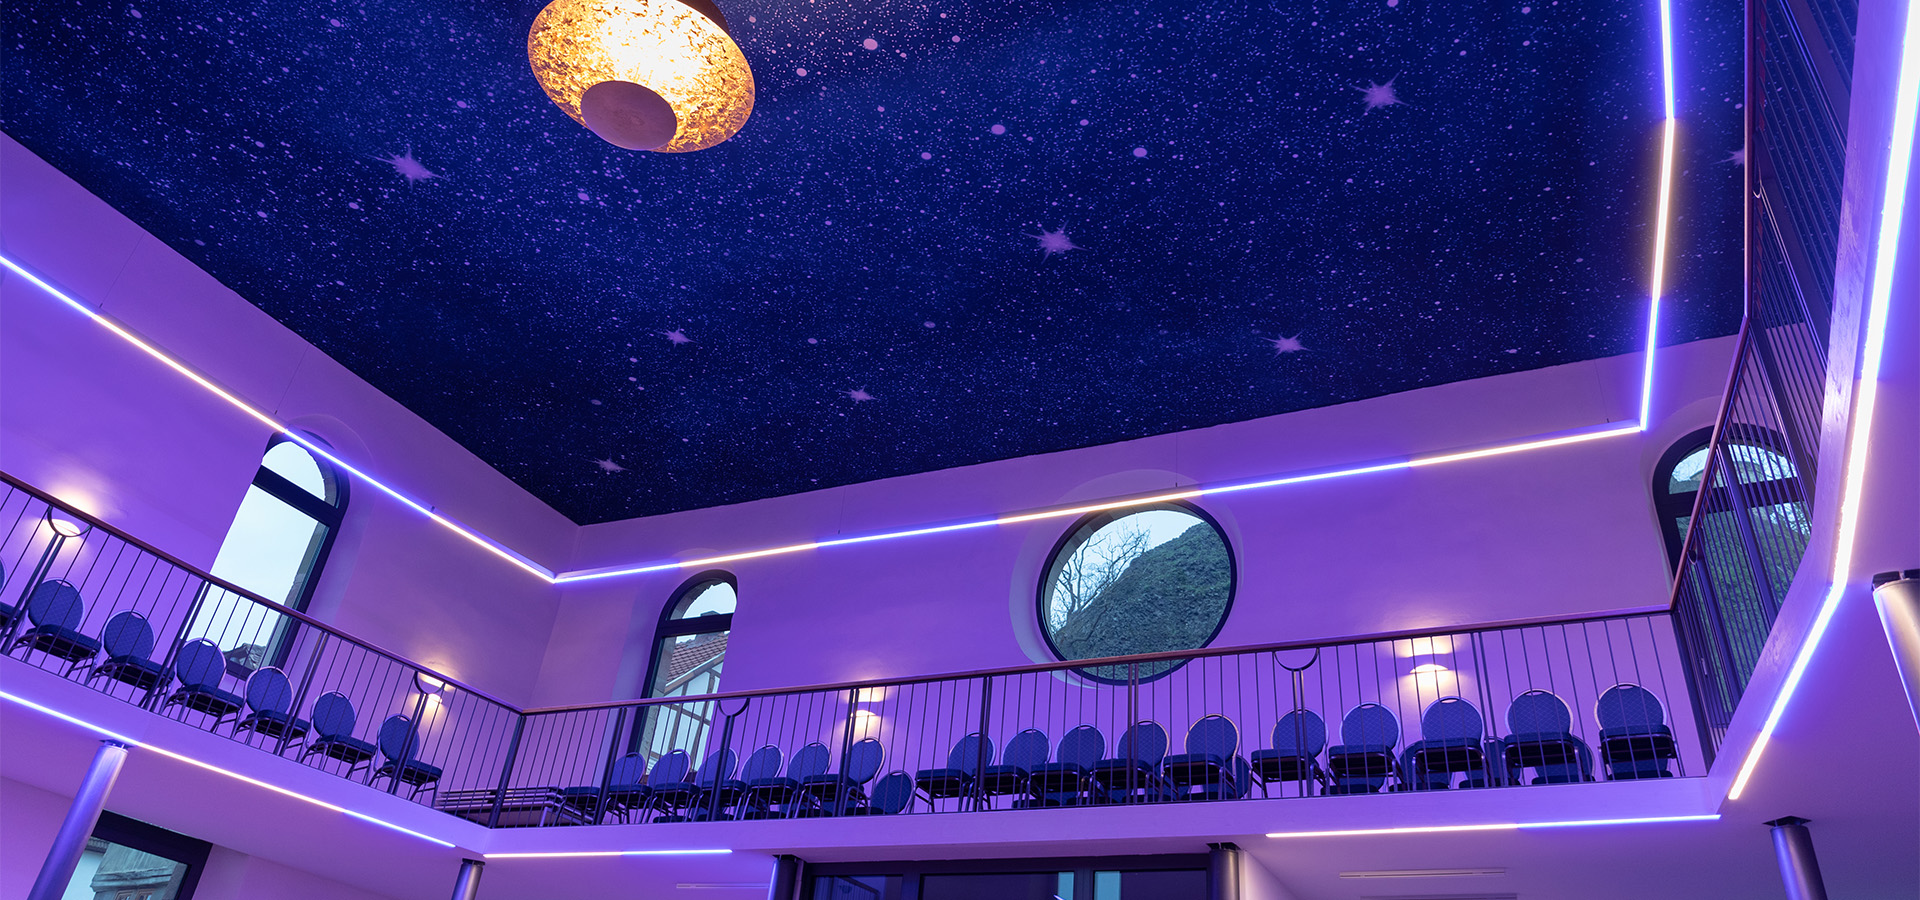 Synagogue Church lighting emotional significance with RGBW Luxsystem luminaires from HADLER